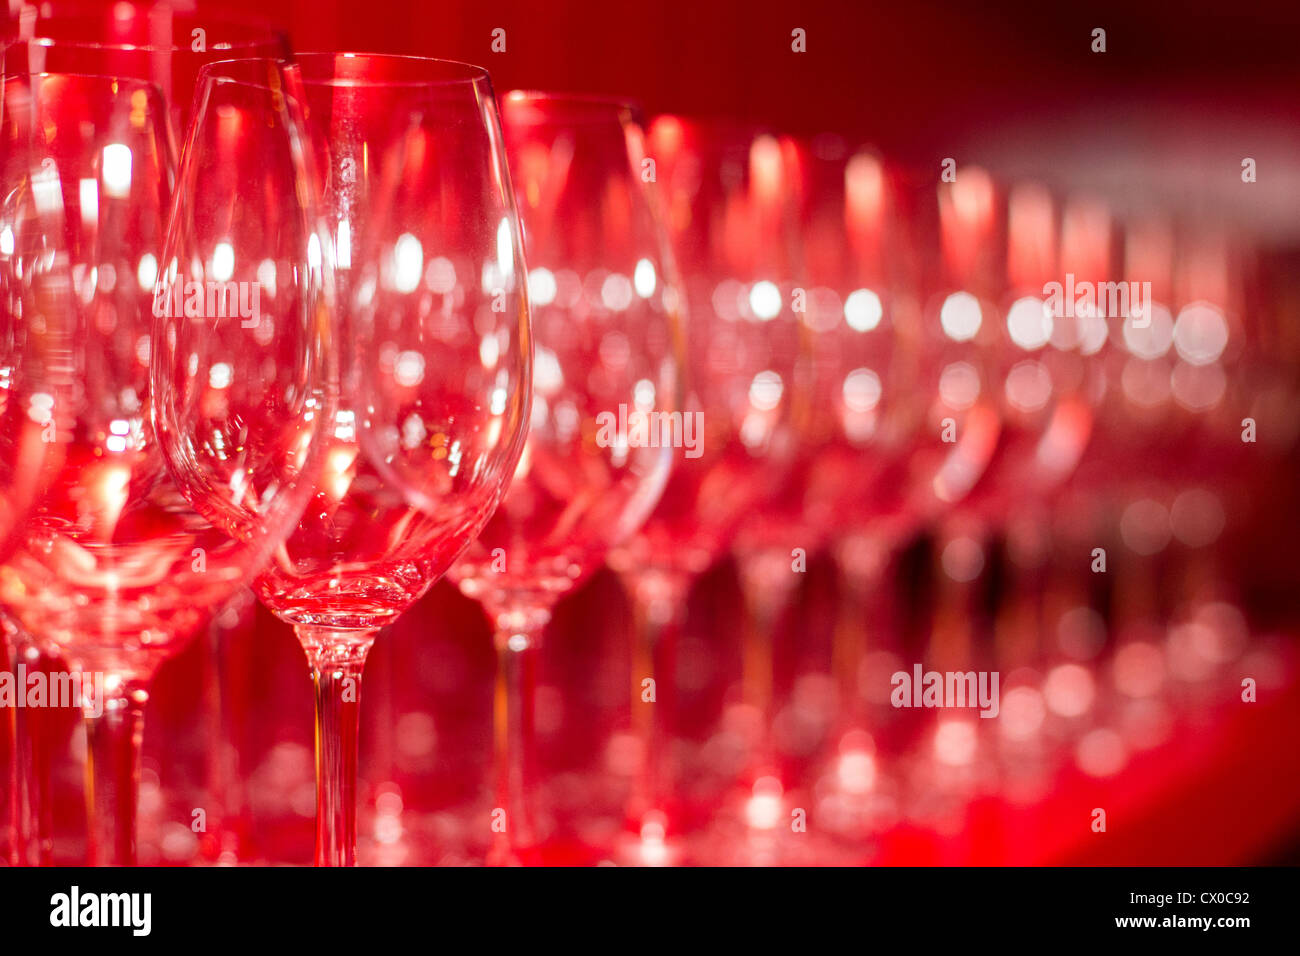 Wine Glasses Lined Up Against a Bright Red Wall Stock Photo